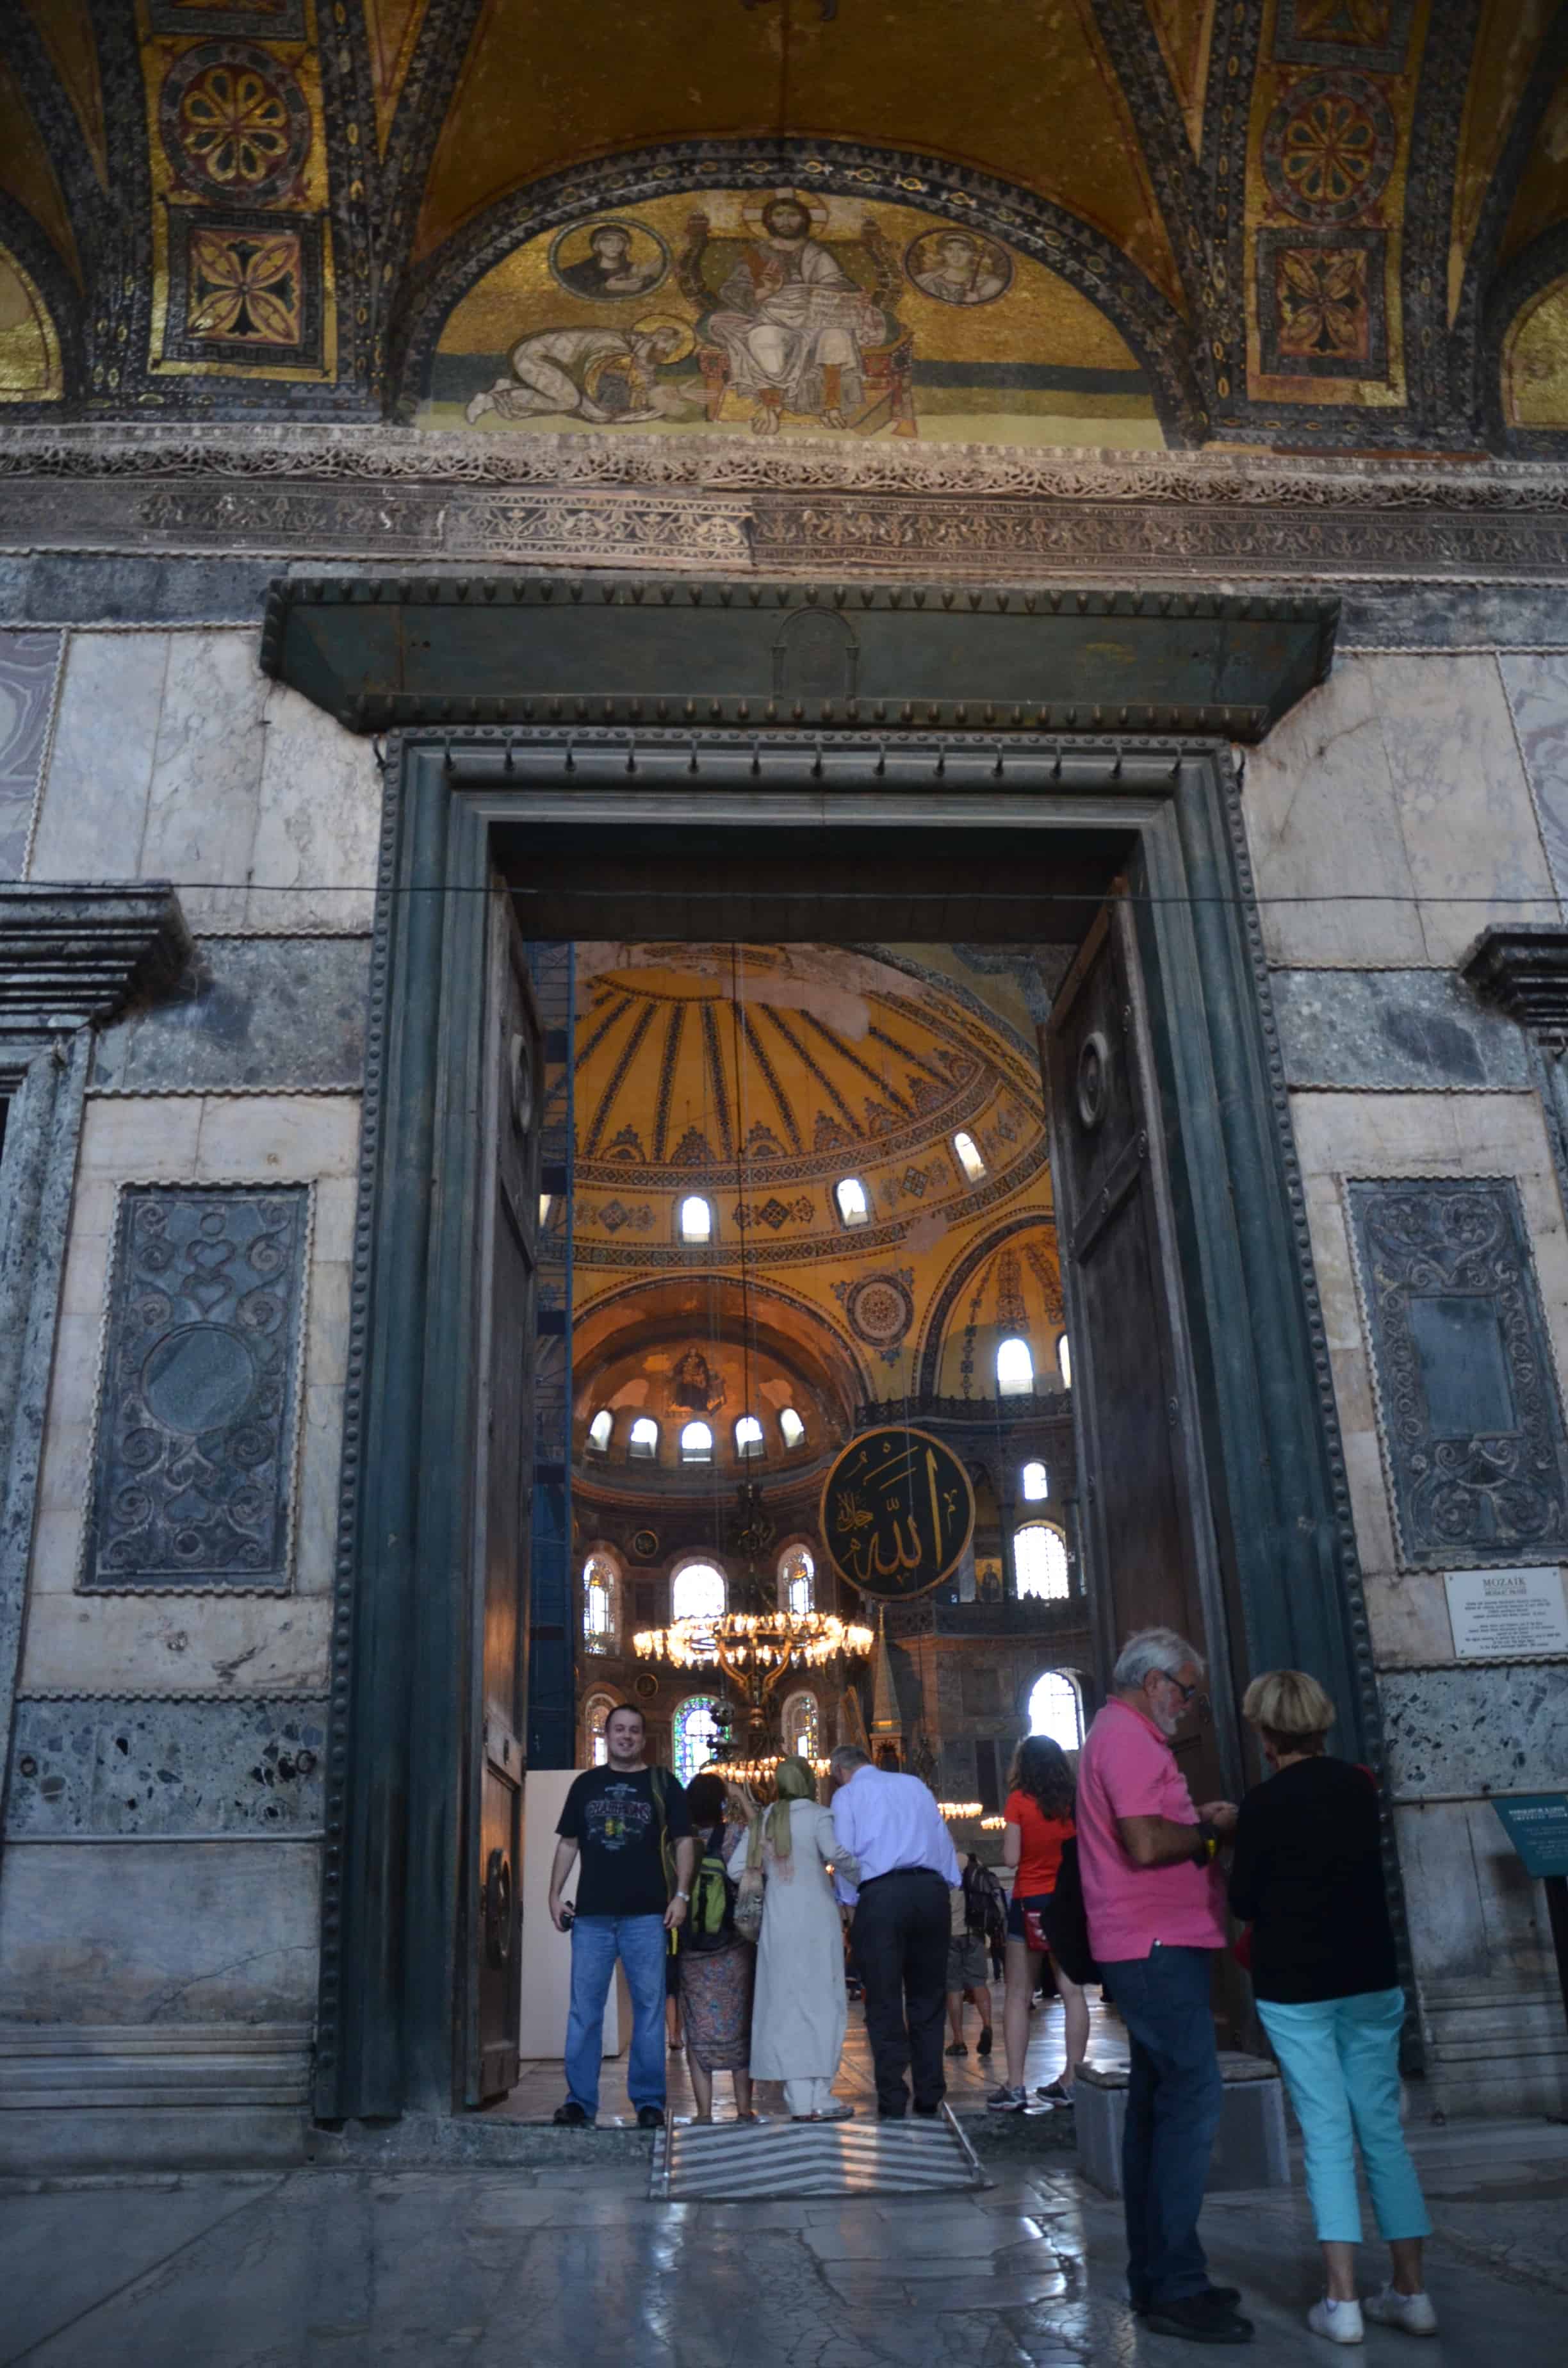 Imperial Gate from the inner narthex at Hagia Sophia in Istanbul, Turkey